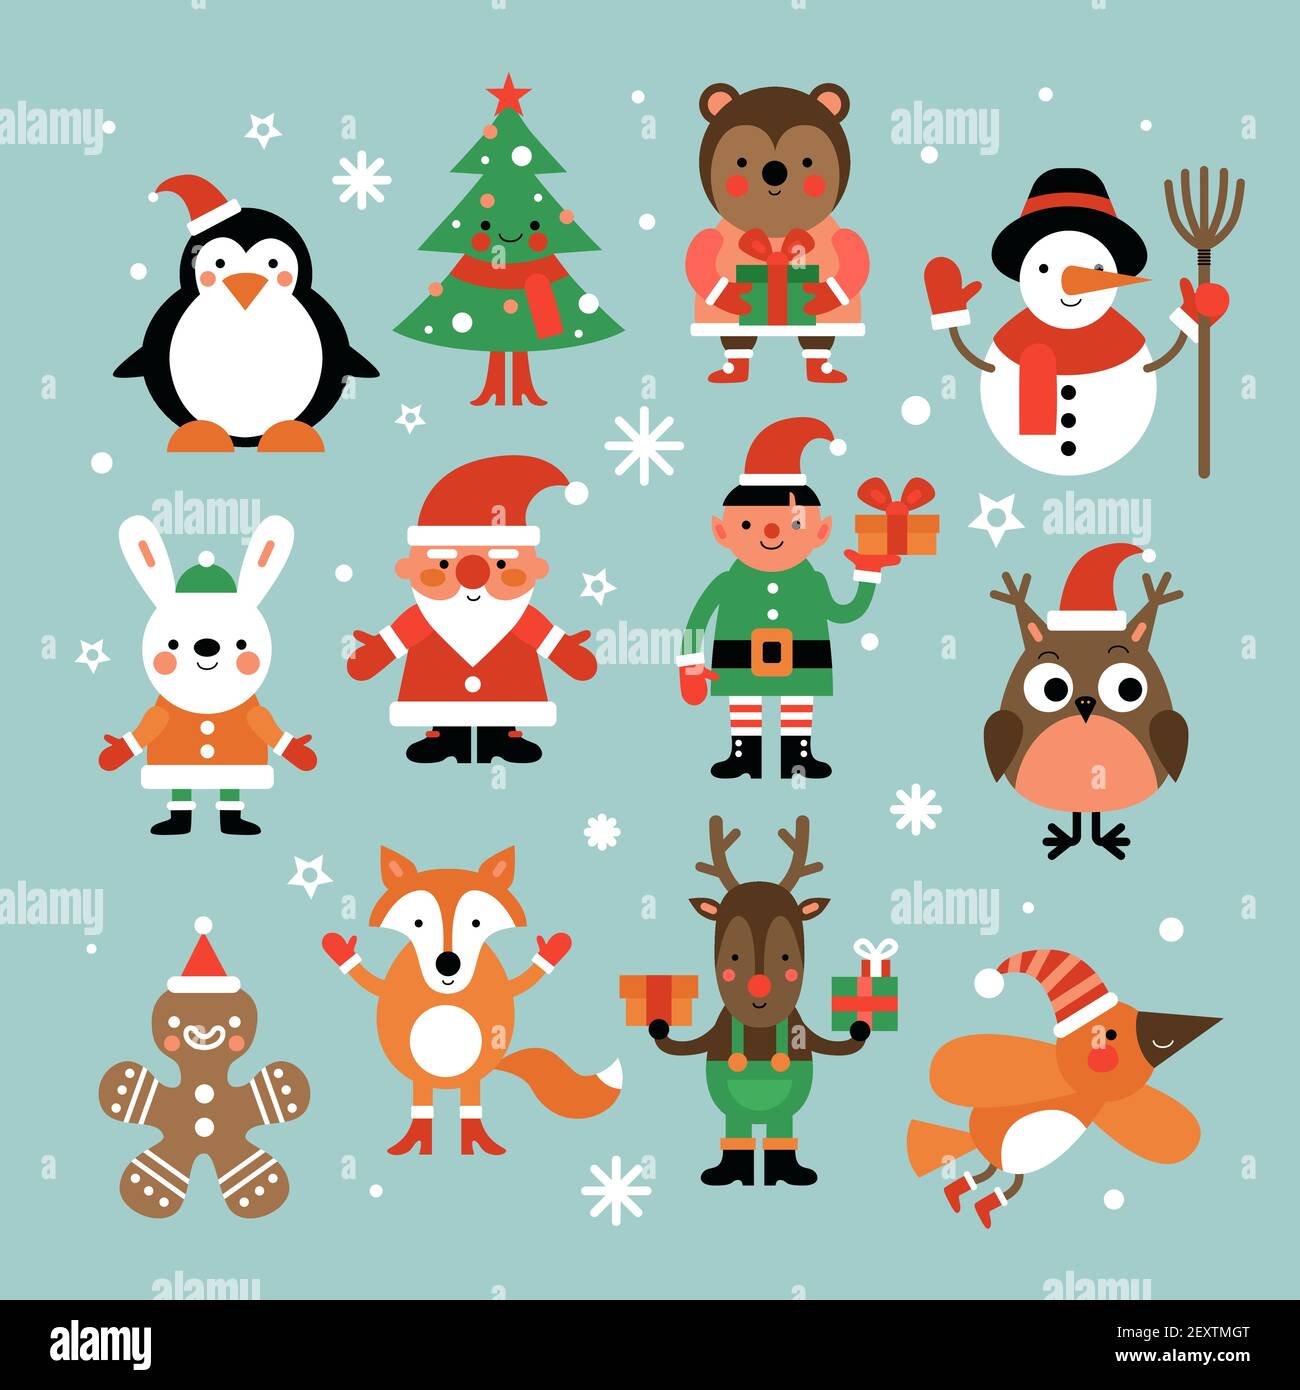 Christmas characters. Santa claus, fir-tree and penguin, snowman and elf, hare and owl, deer and gingerbread man cartoon vector set. Christmas snowman and penguin, deer elf illustration Stock Vector